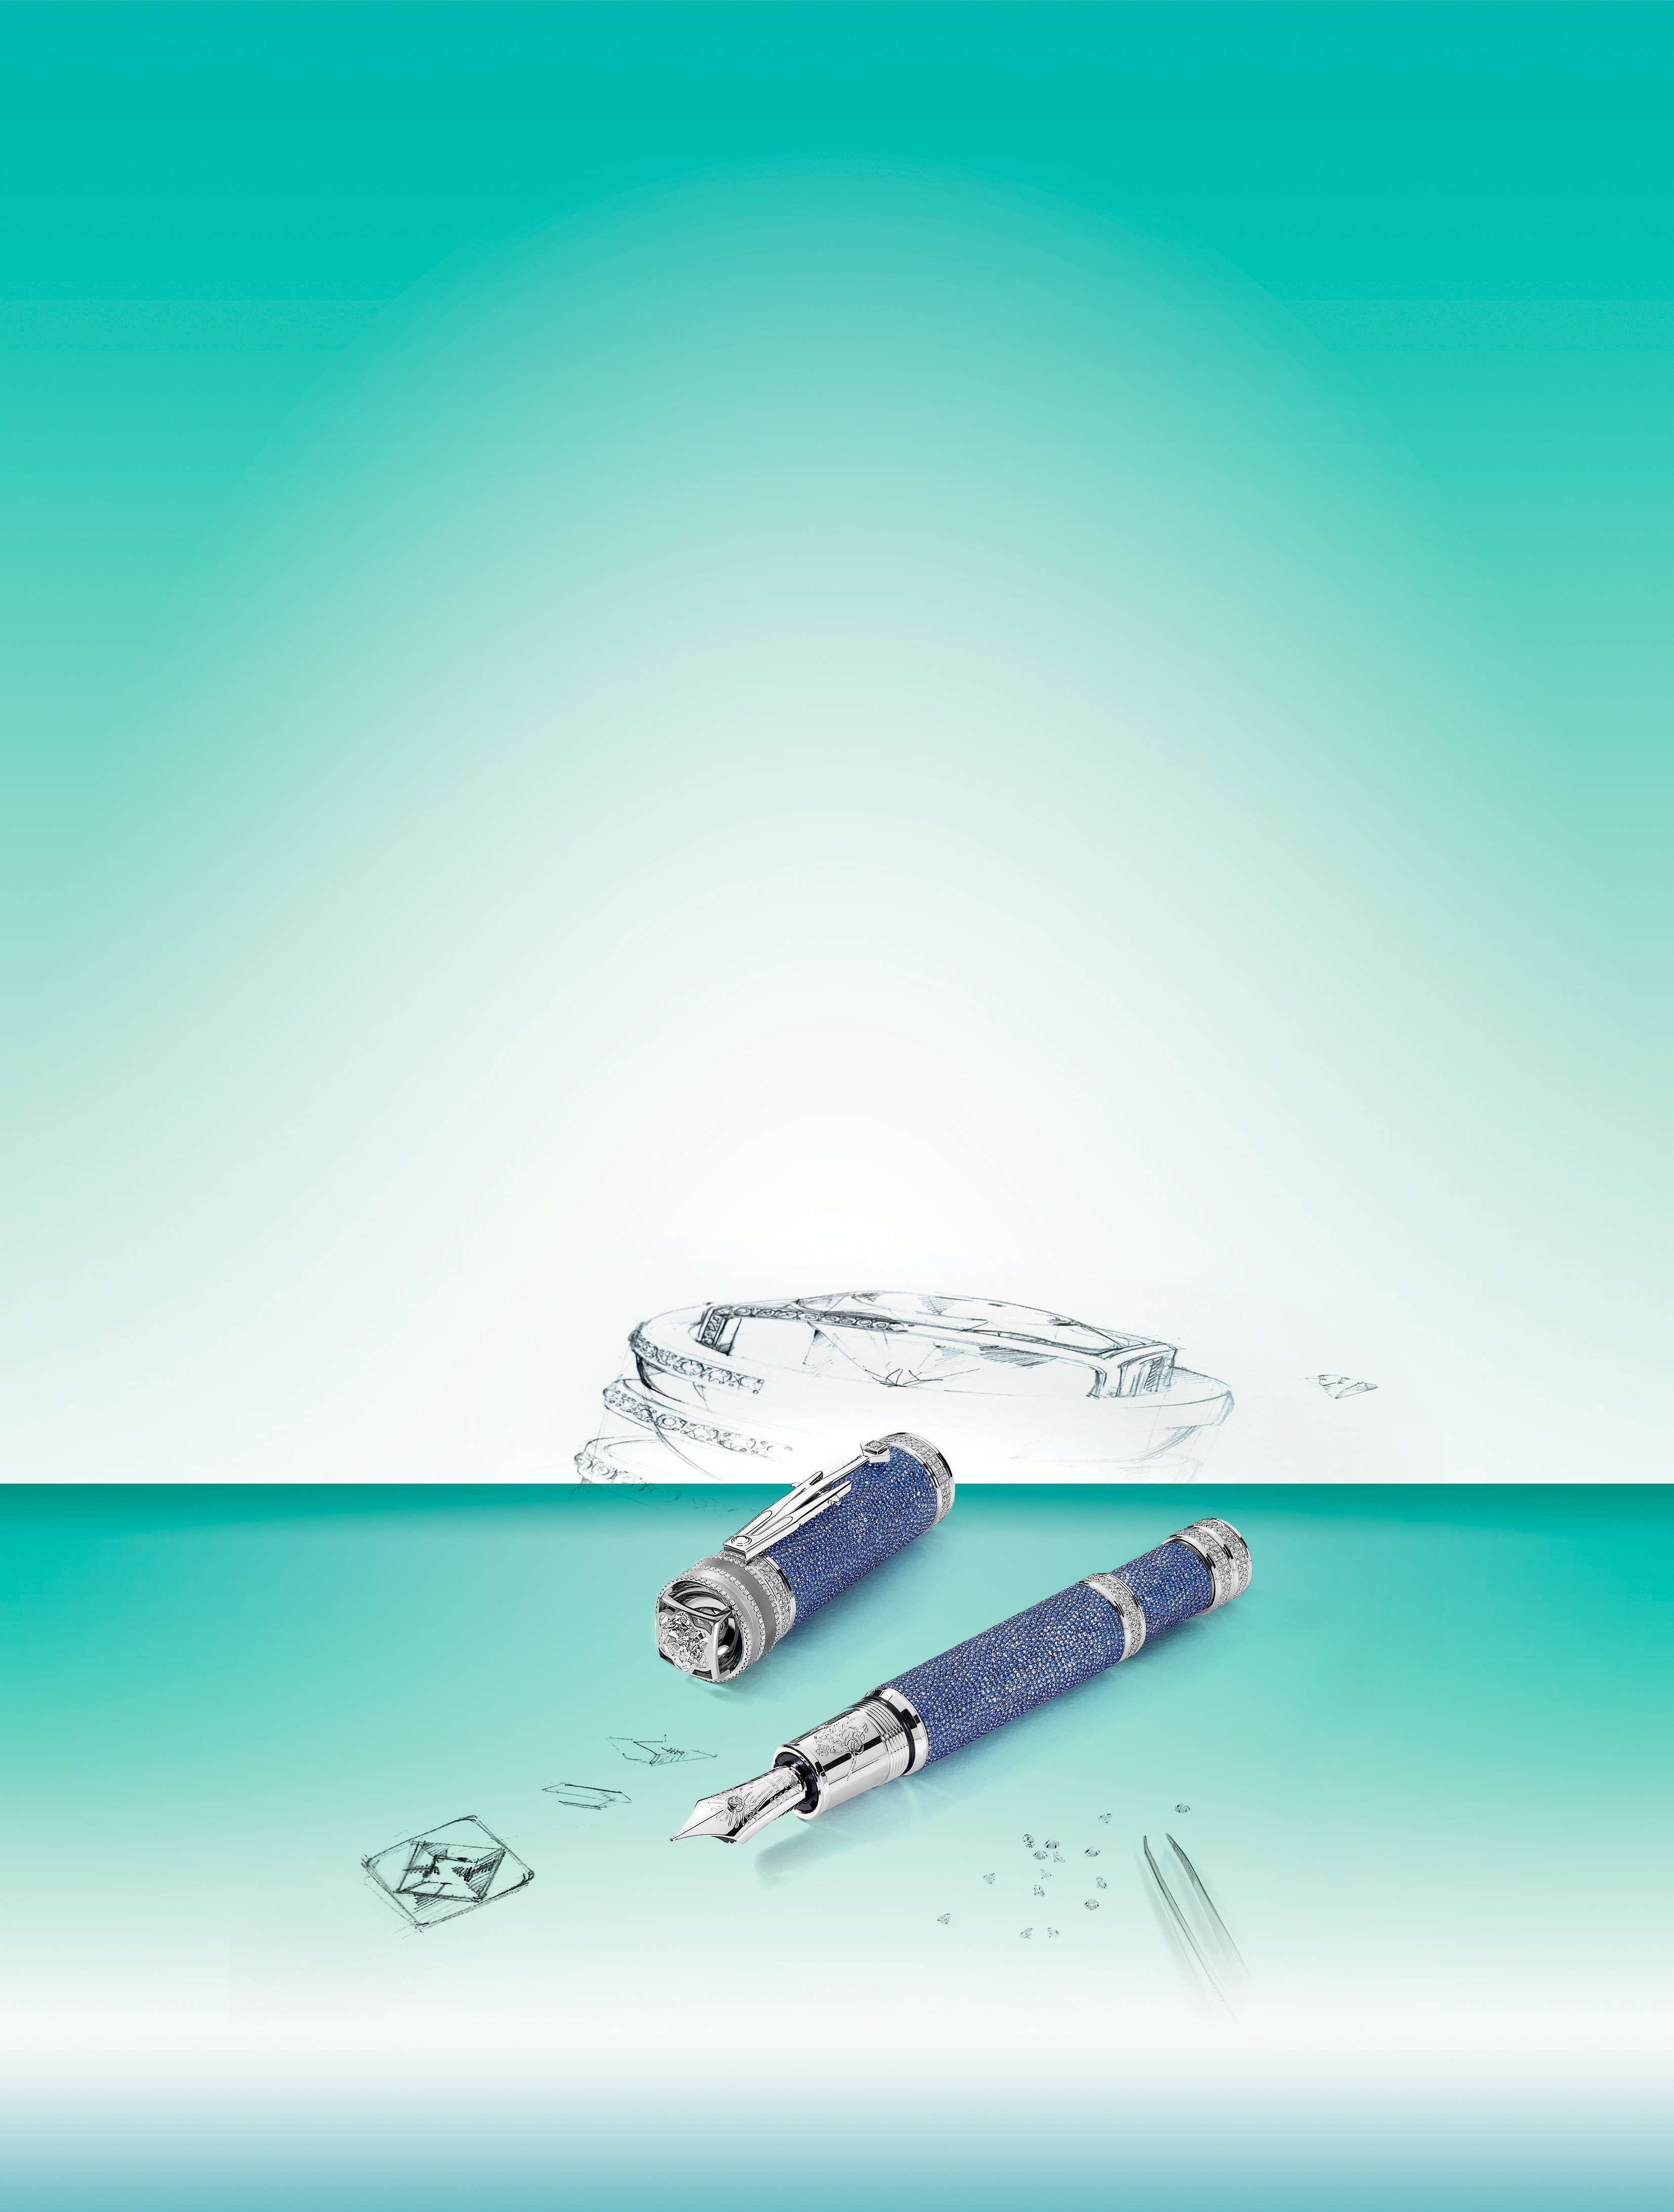 The cap and barrel of the pen are covered in sapphires and diamonds.